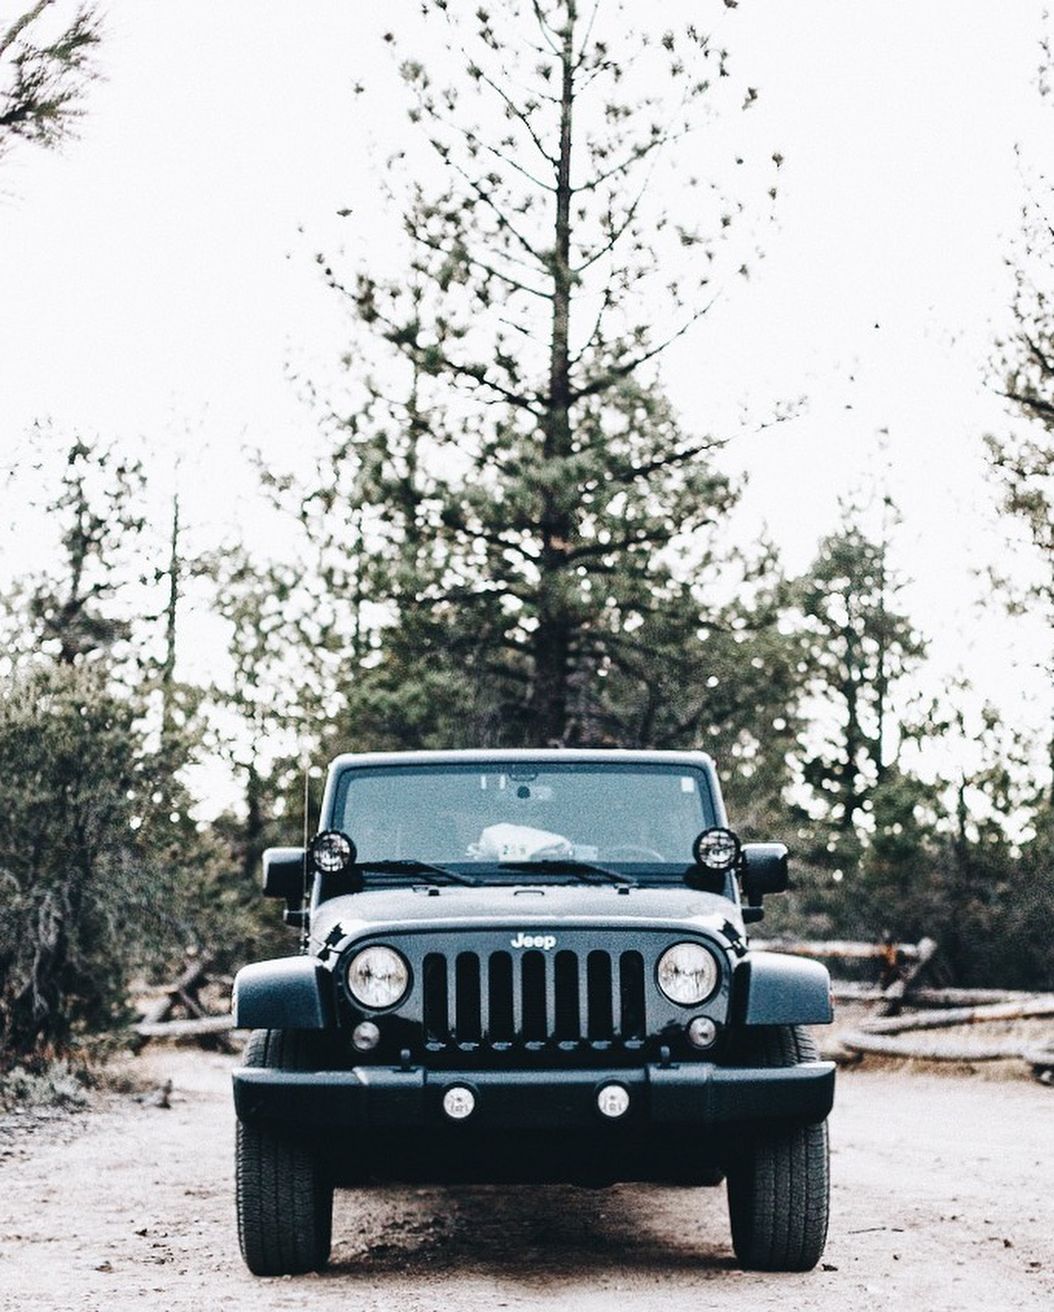 jeep aesthetic. Jeep wallpaper, Dream cars, Dream cars jeep